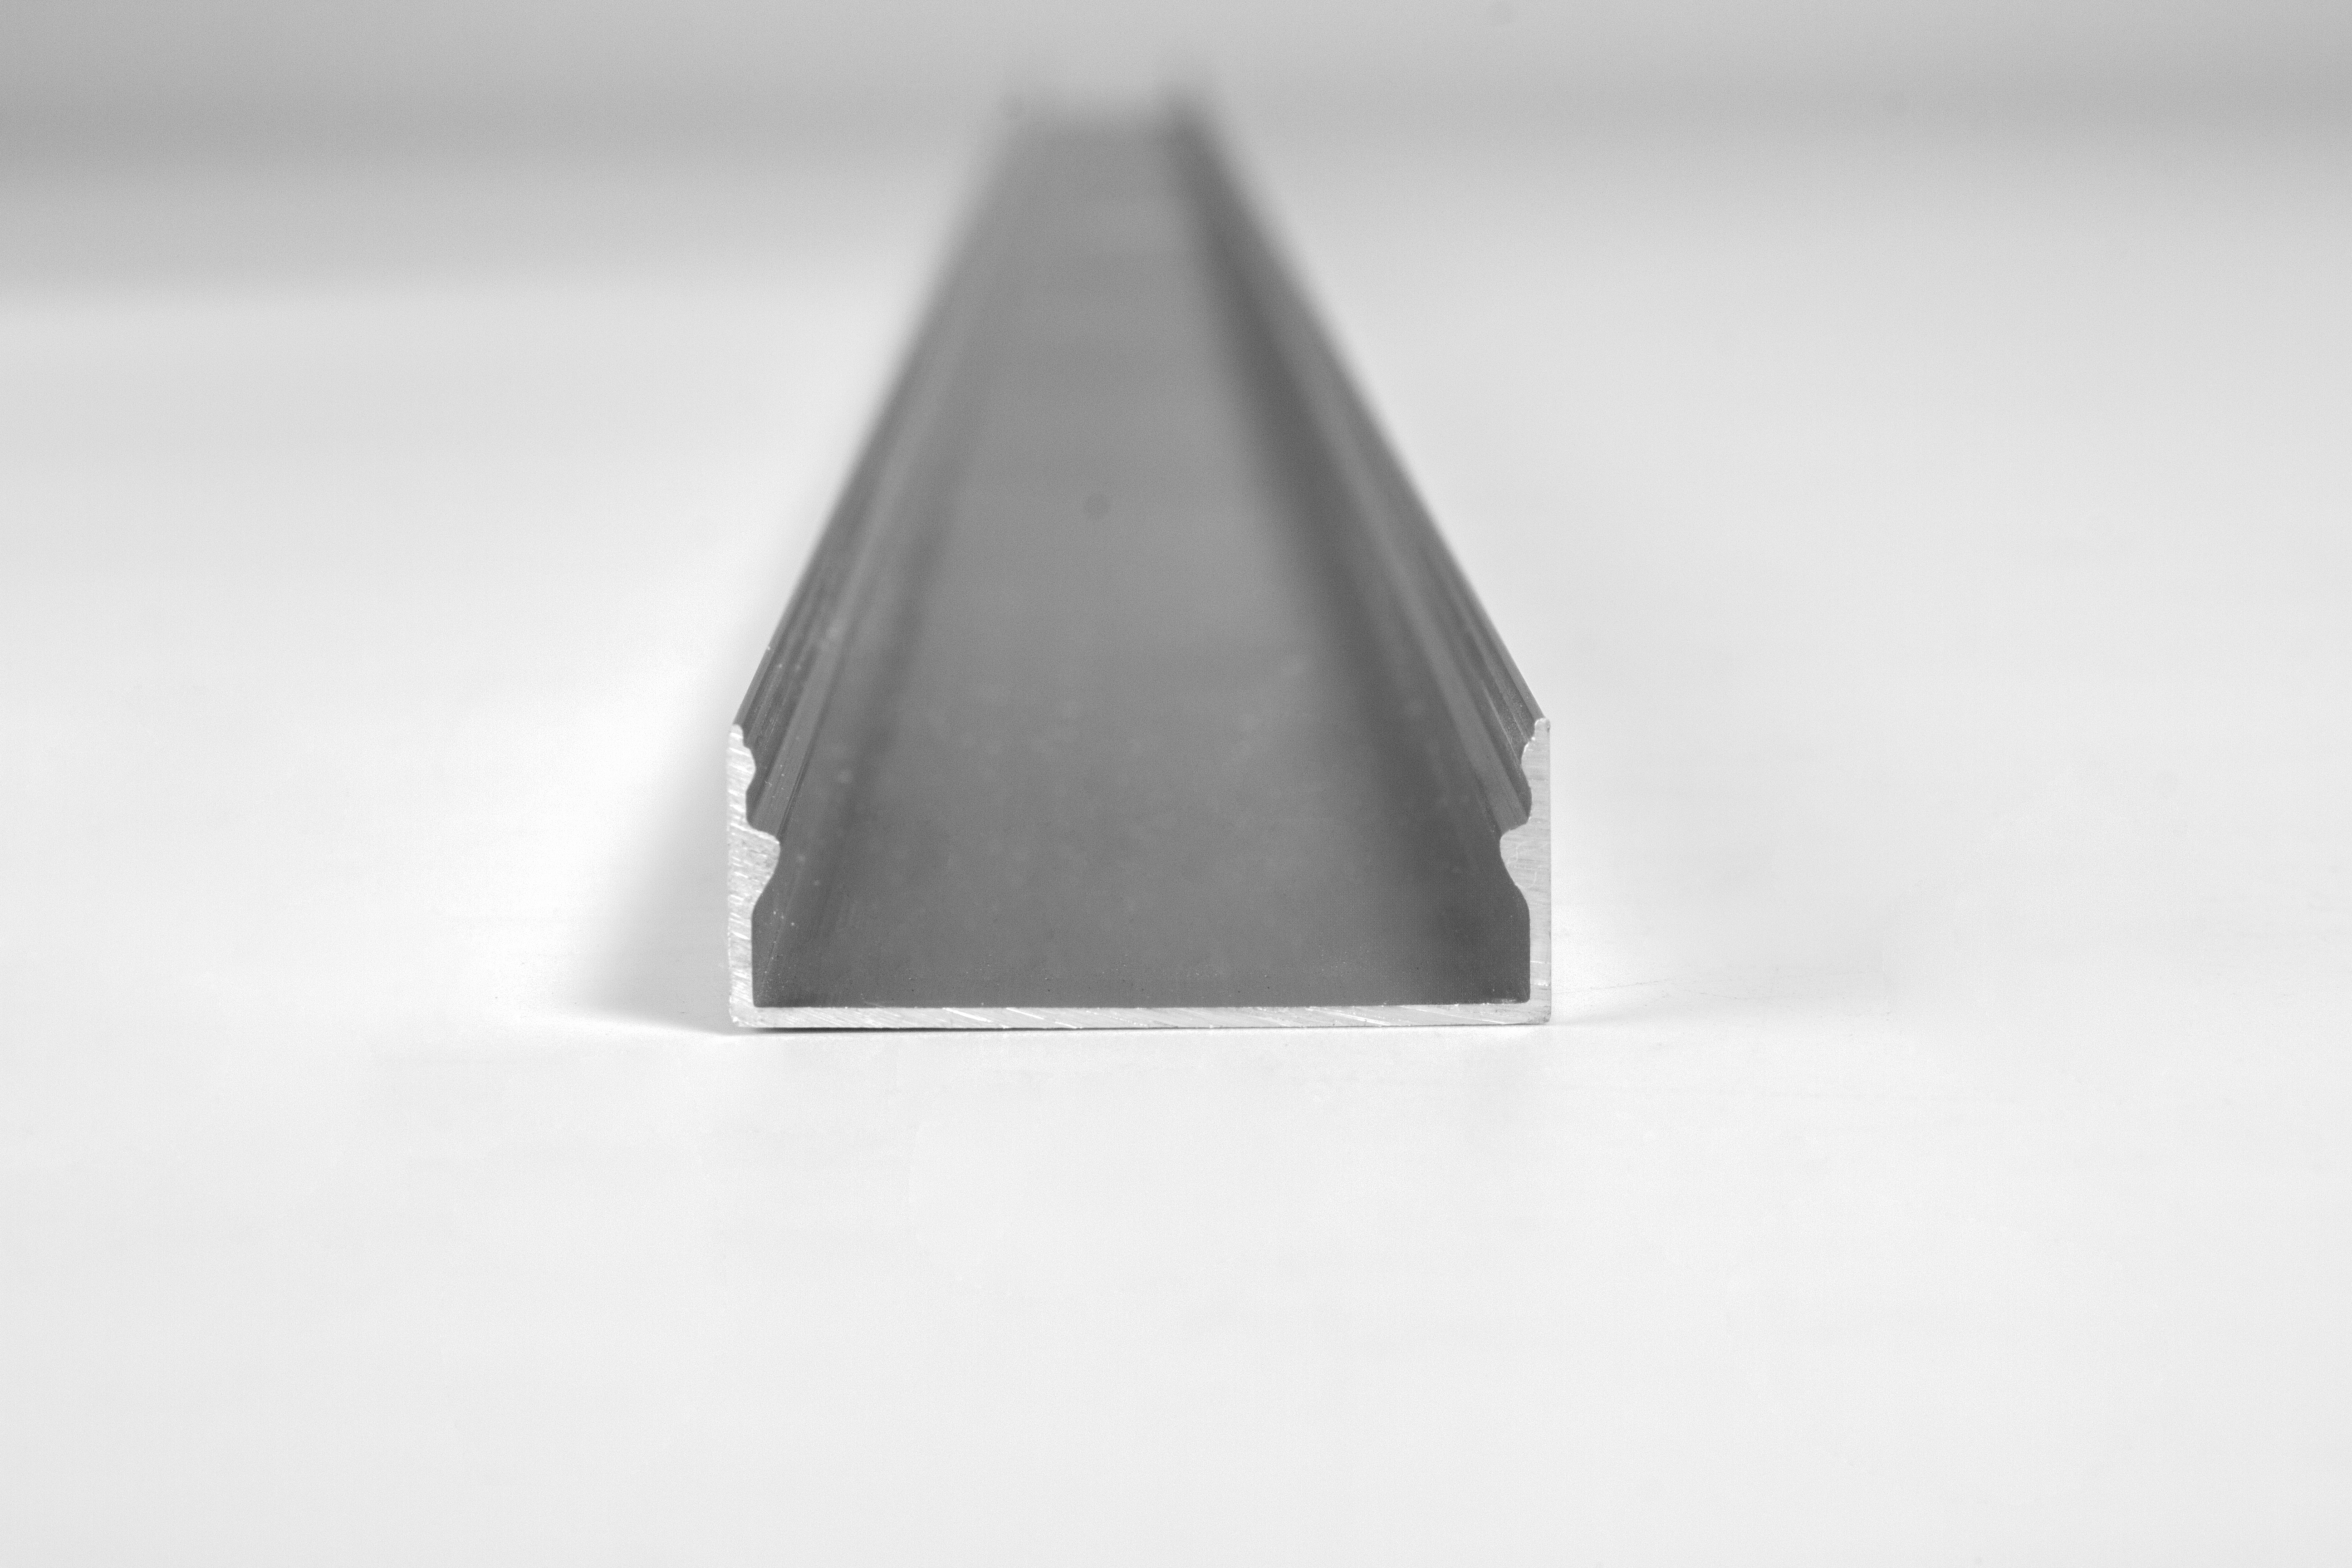 35X12mm Surface Profile